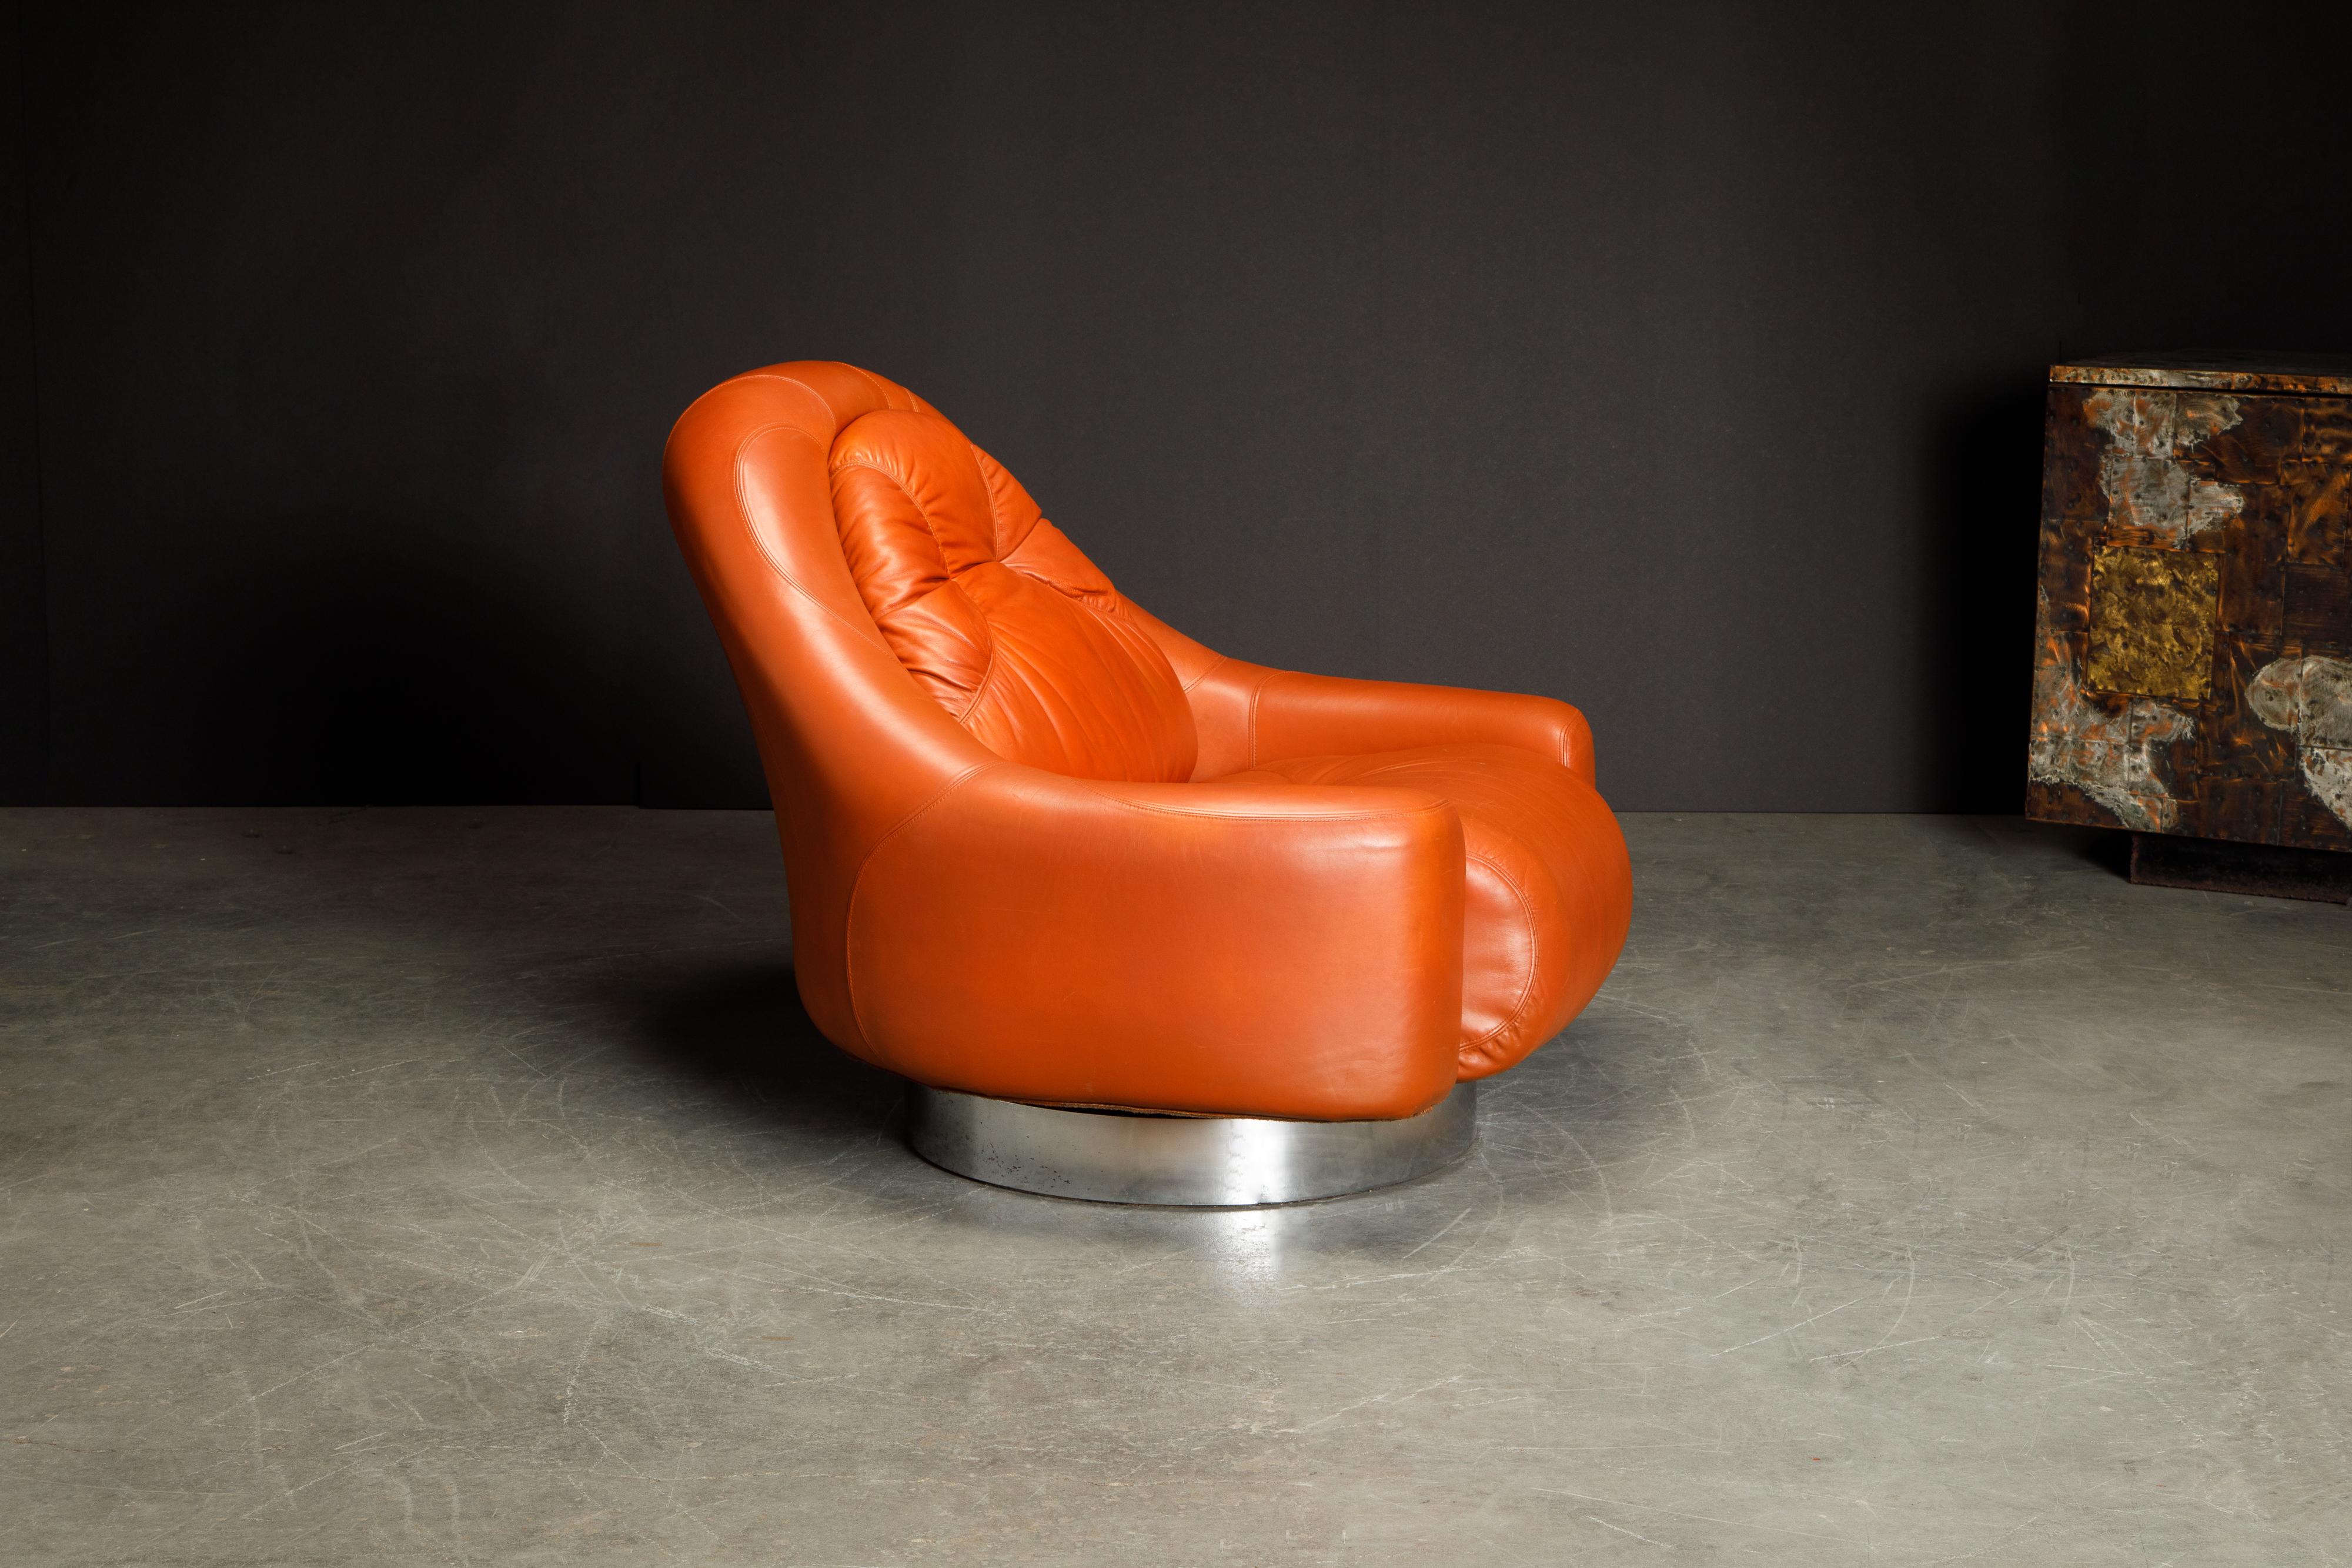 Steel 'Zator' Swivel Chair and Ottoman by Guido Faleschini for Mariani, 1971, Signed